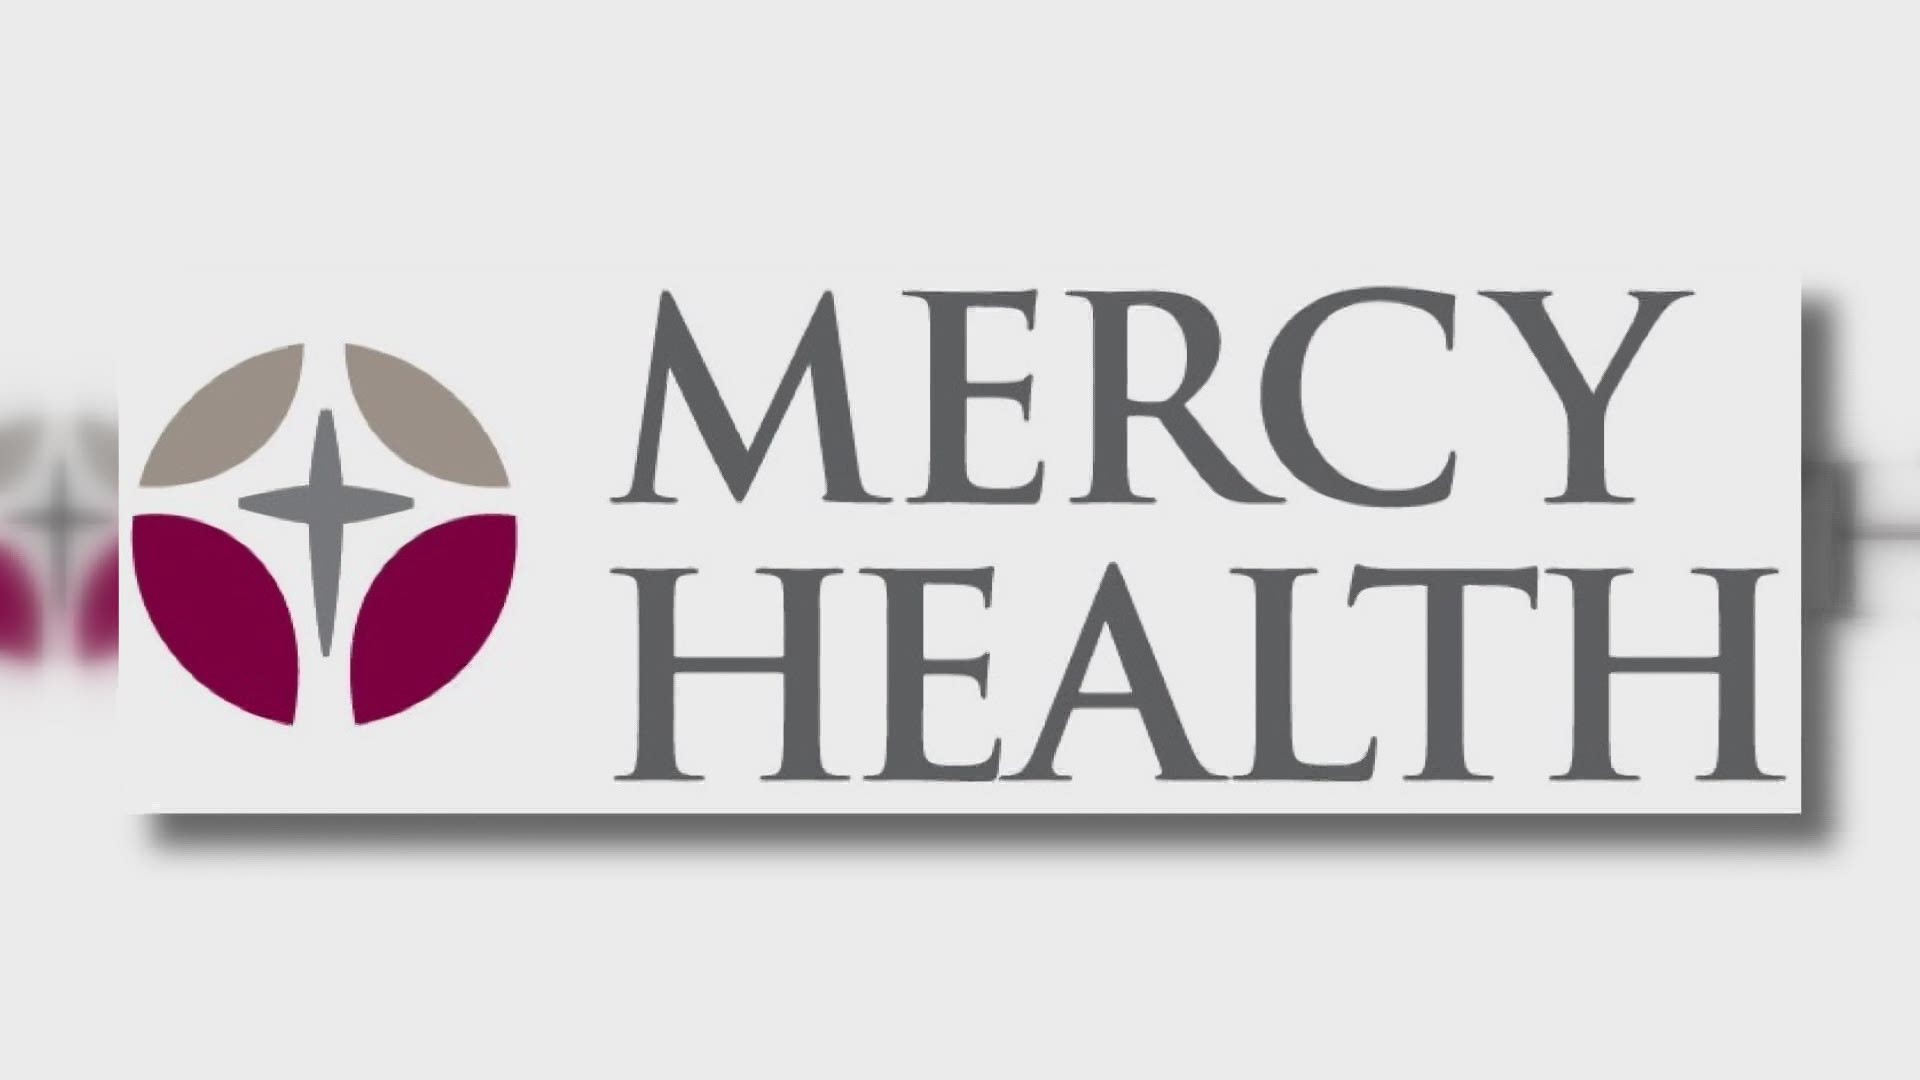 February is Heart Health Awareness Month and we spoke with Mercy Health Interventional Cardiologist, Dr. Noah Thormeier about heart-healthy choices.